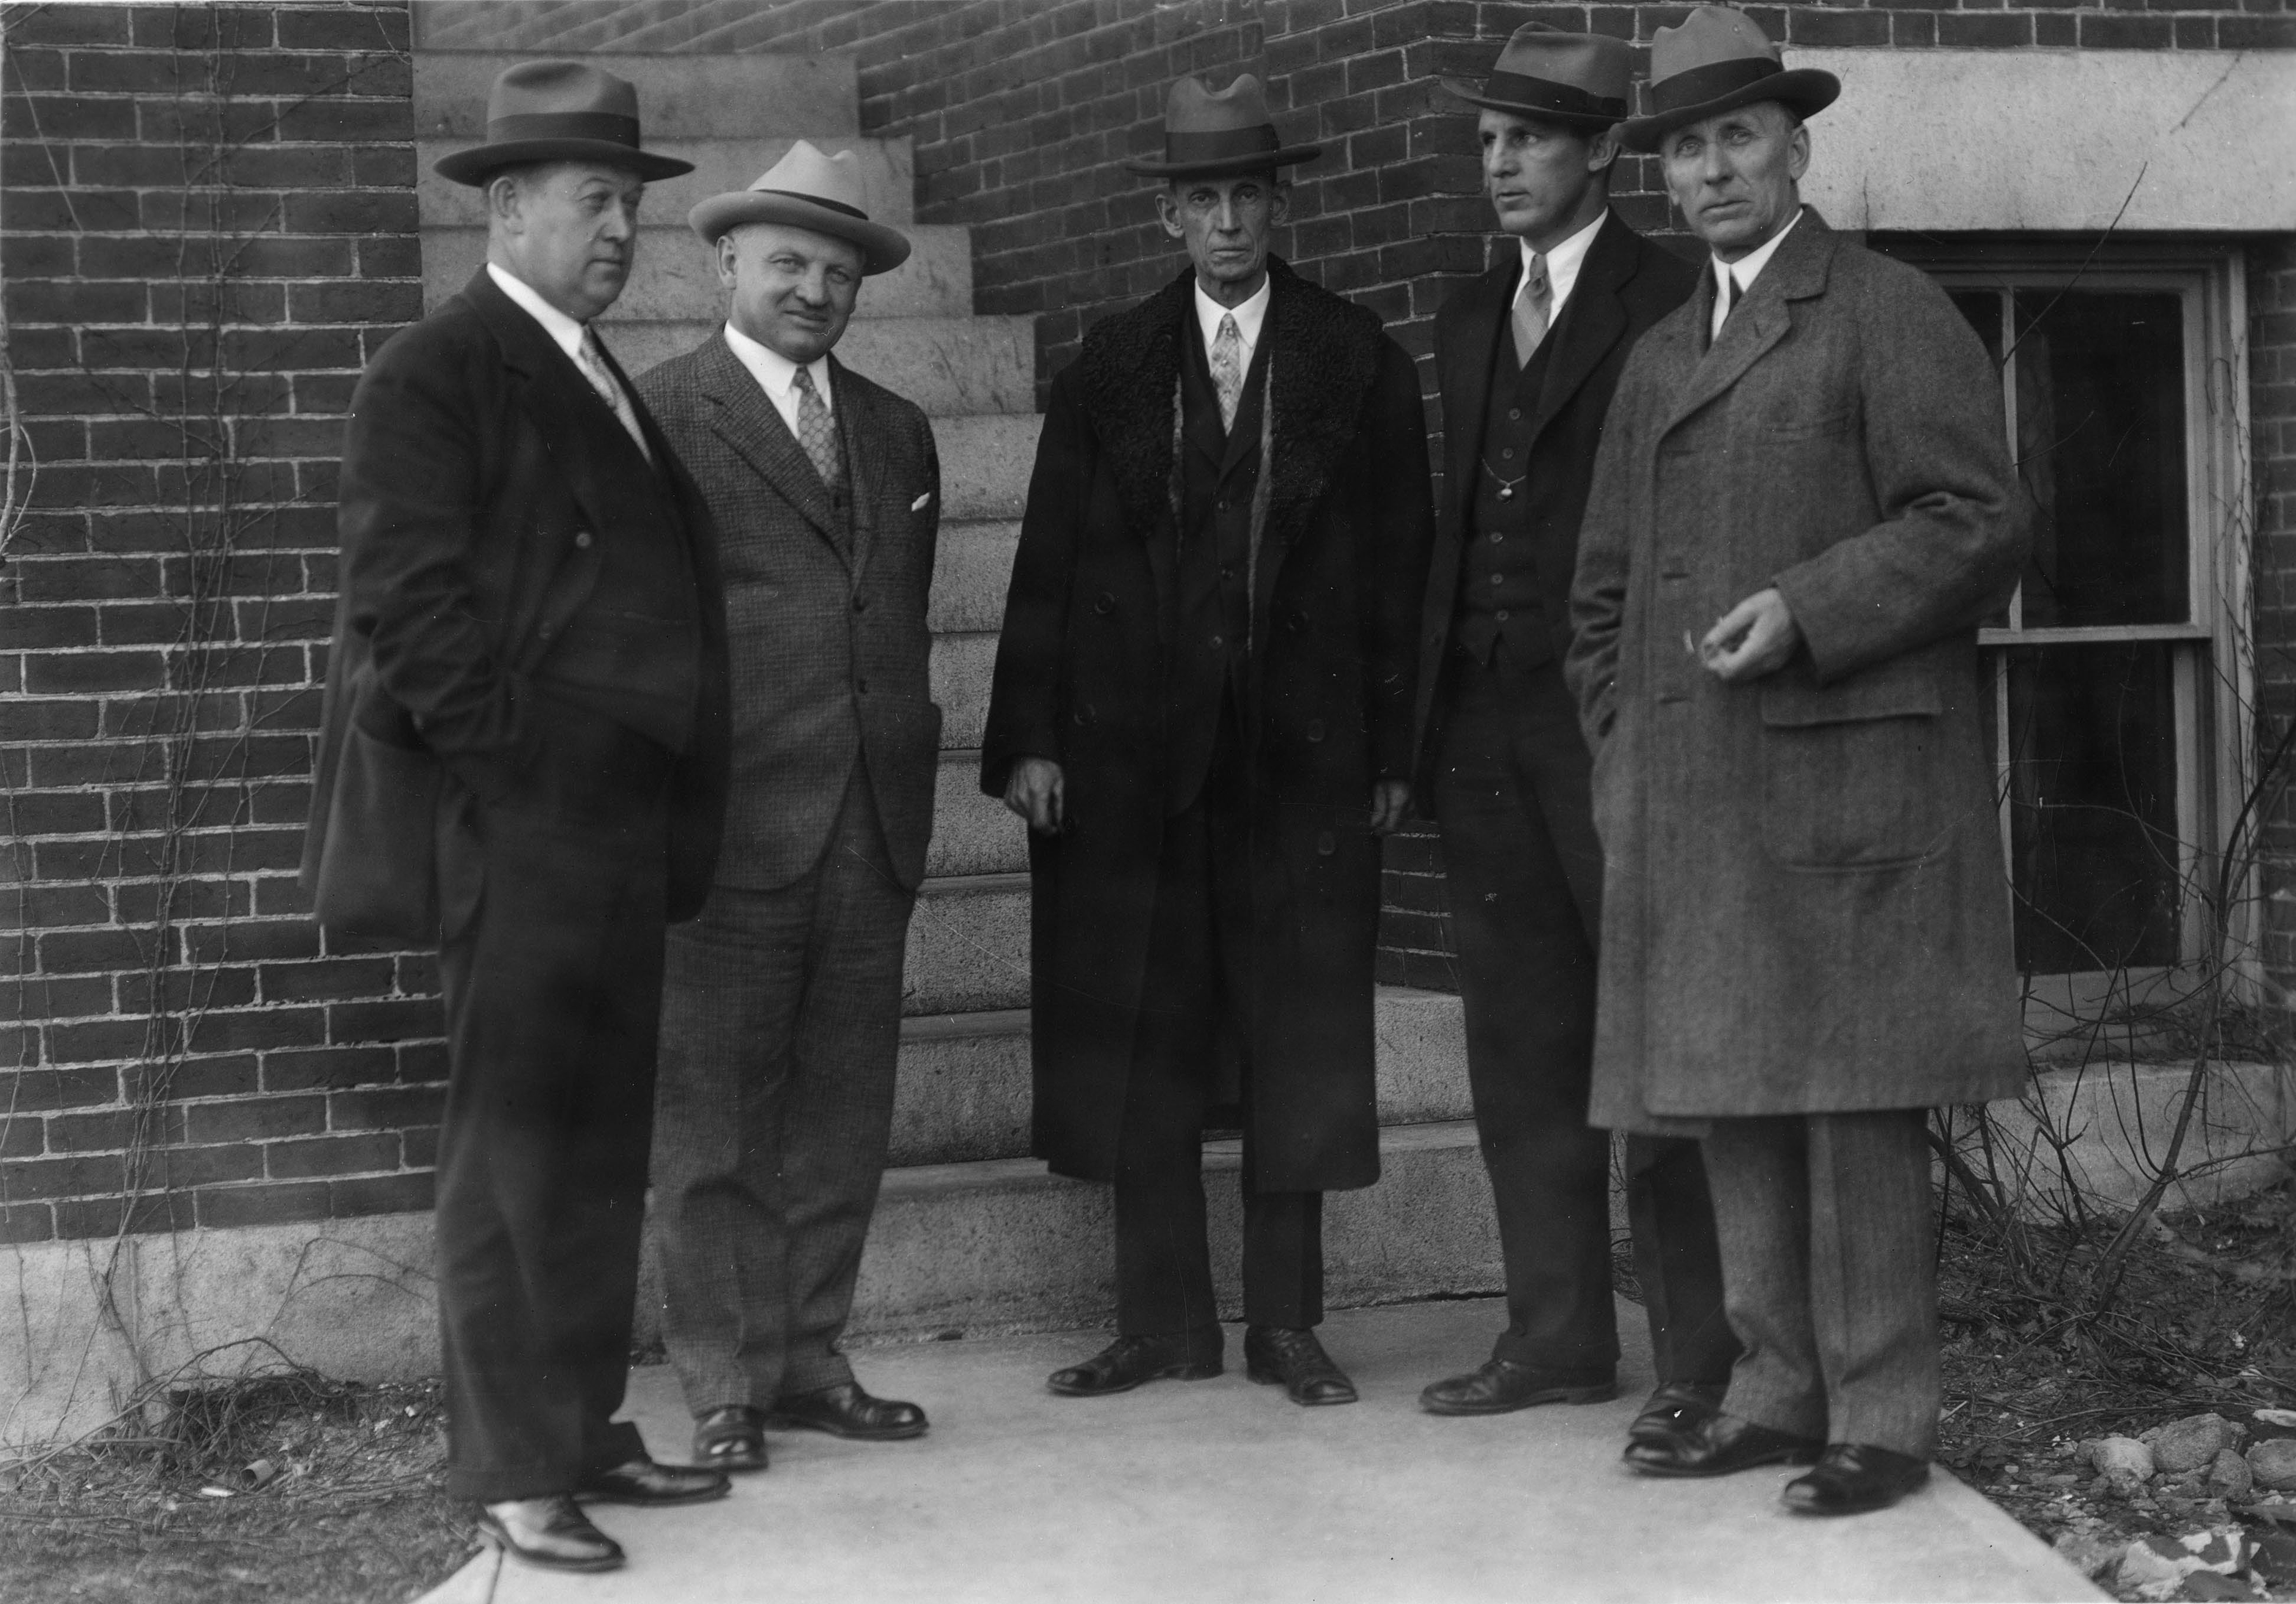 Coaches William "Butch" Cowell, Hugo Bezdek, and Ernest Christensen stands with Edward Lewis